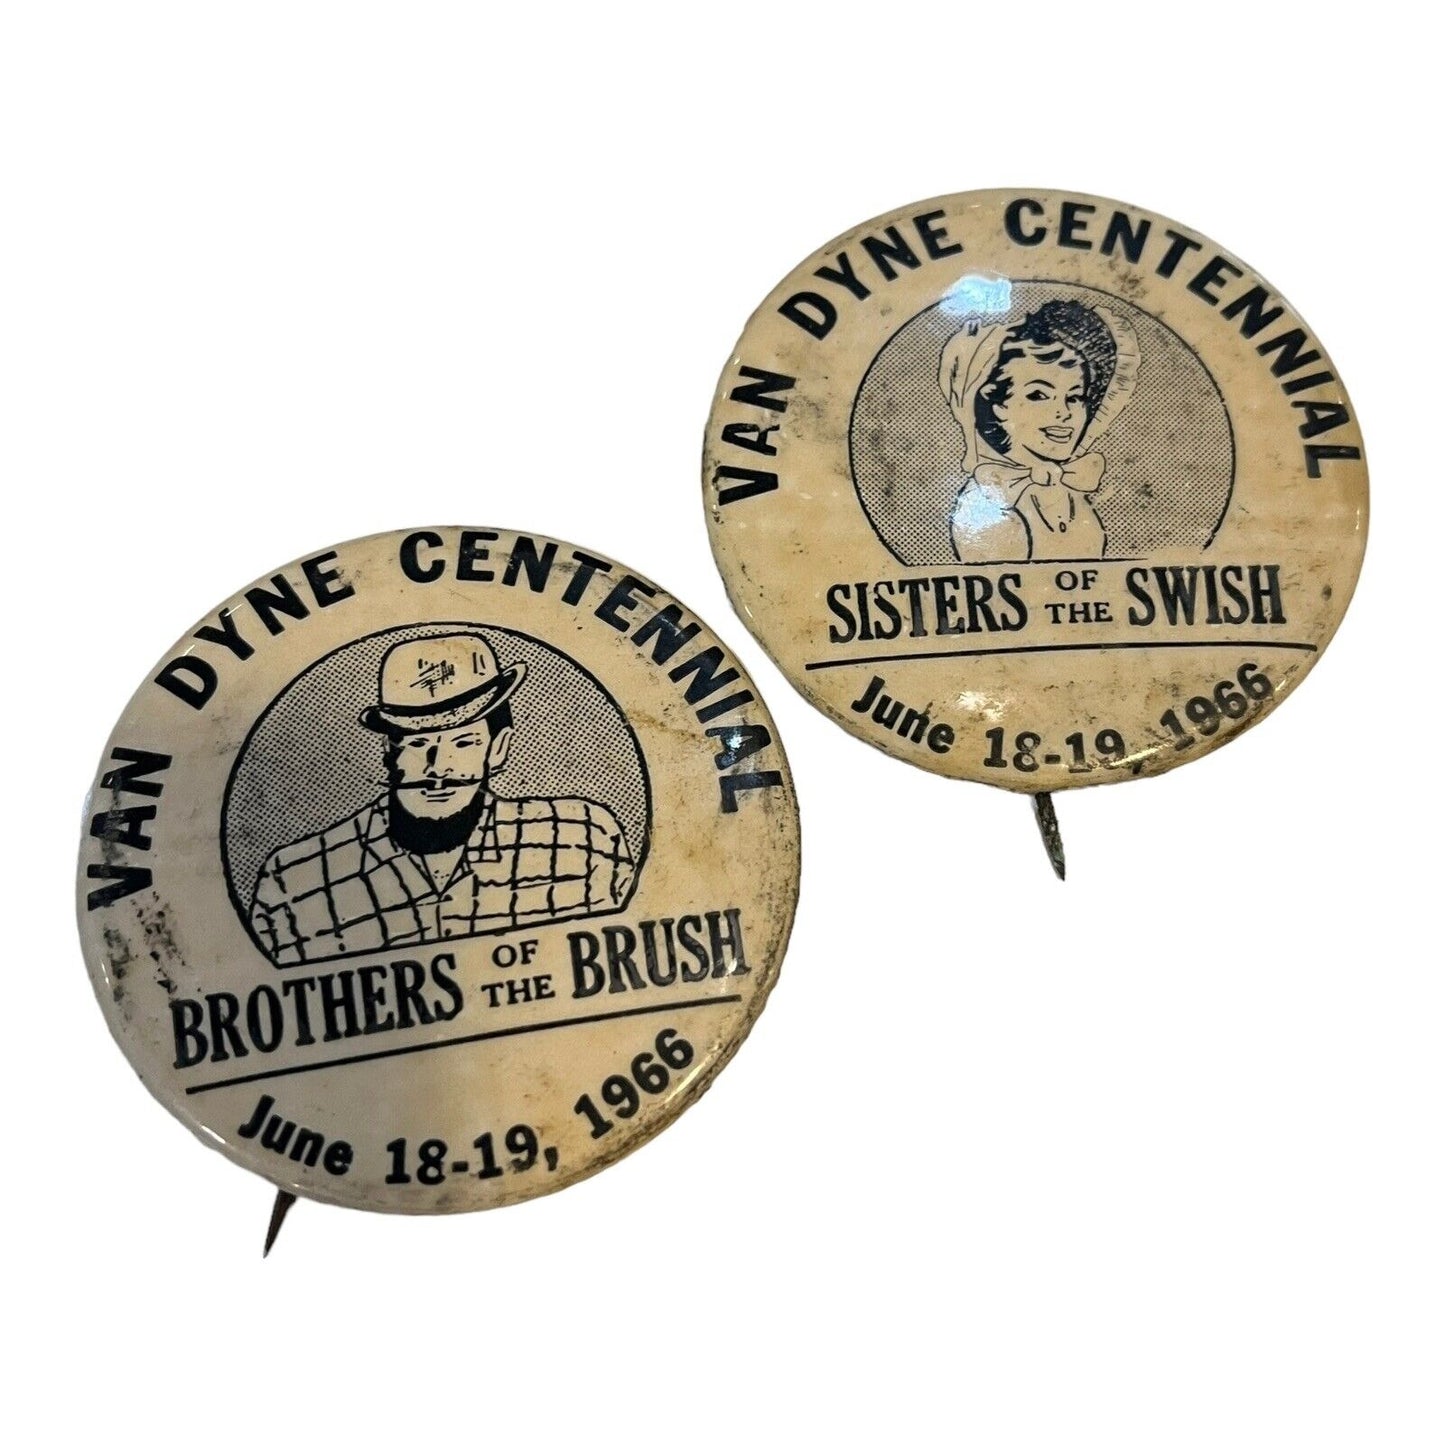 Vintage Van Dyne Wis Centennial 1966 Buttons Pins Brothers of the Brush / Sister